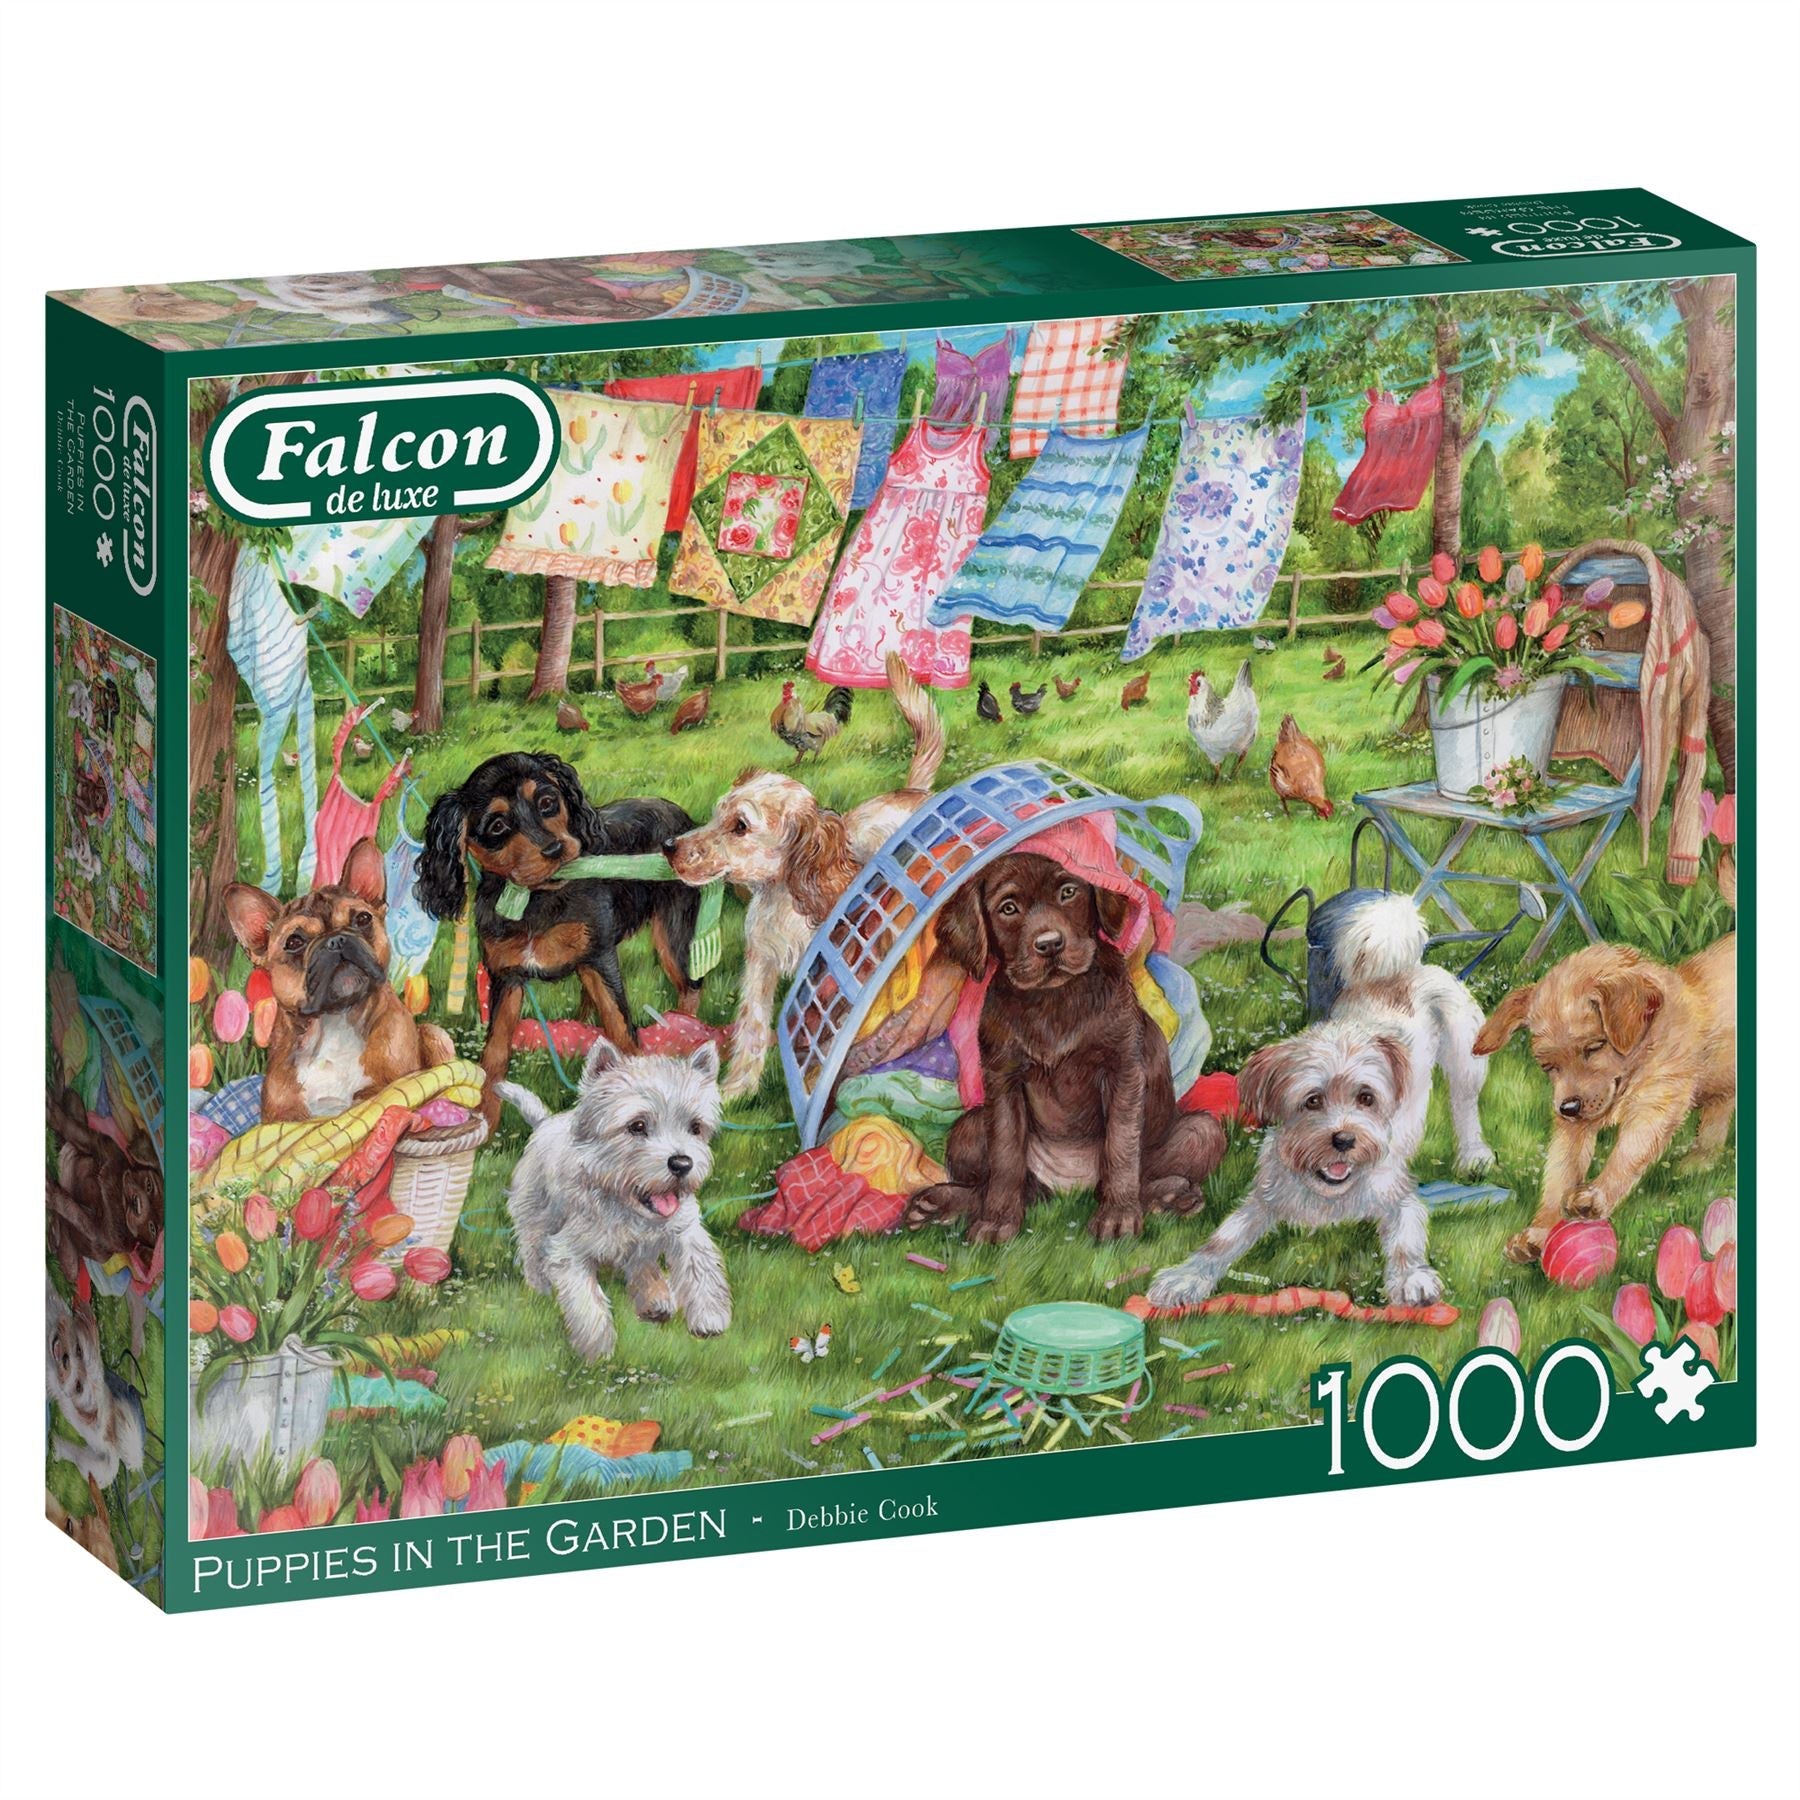 Puppies in the Garden 1000 Piece Jigsaw Puzzle box 1 